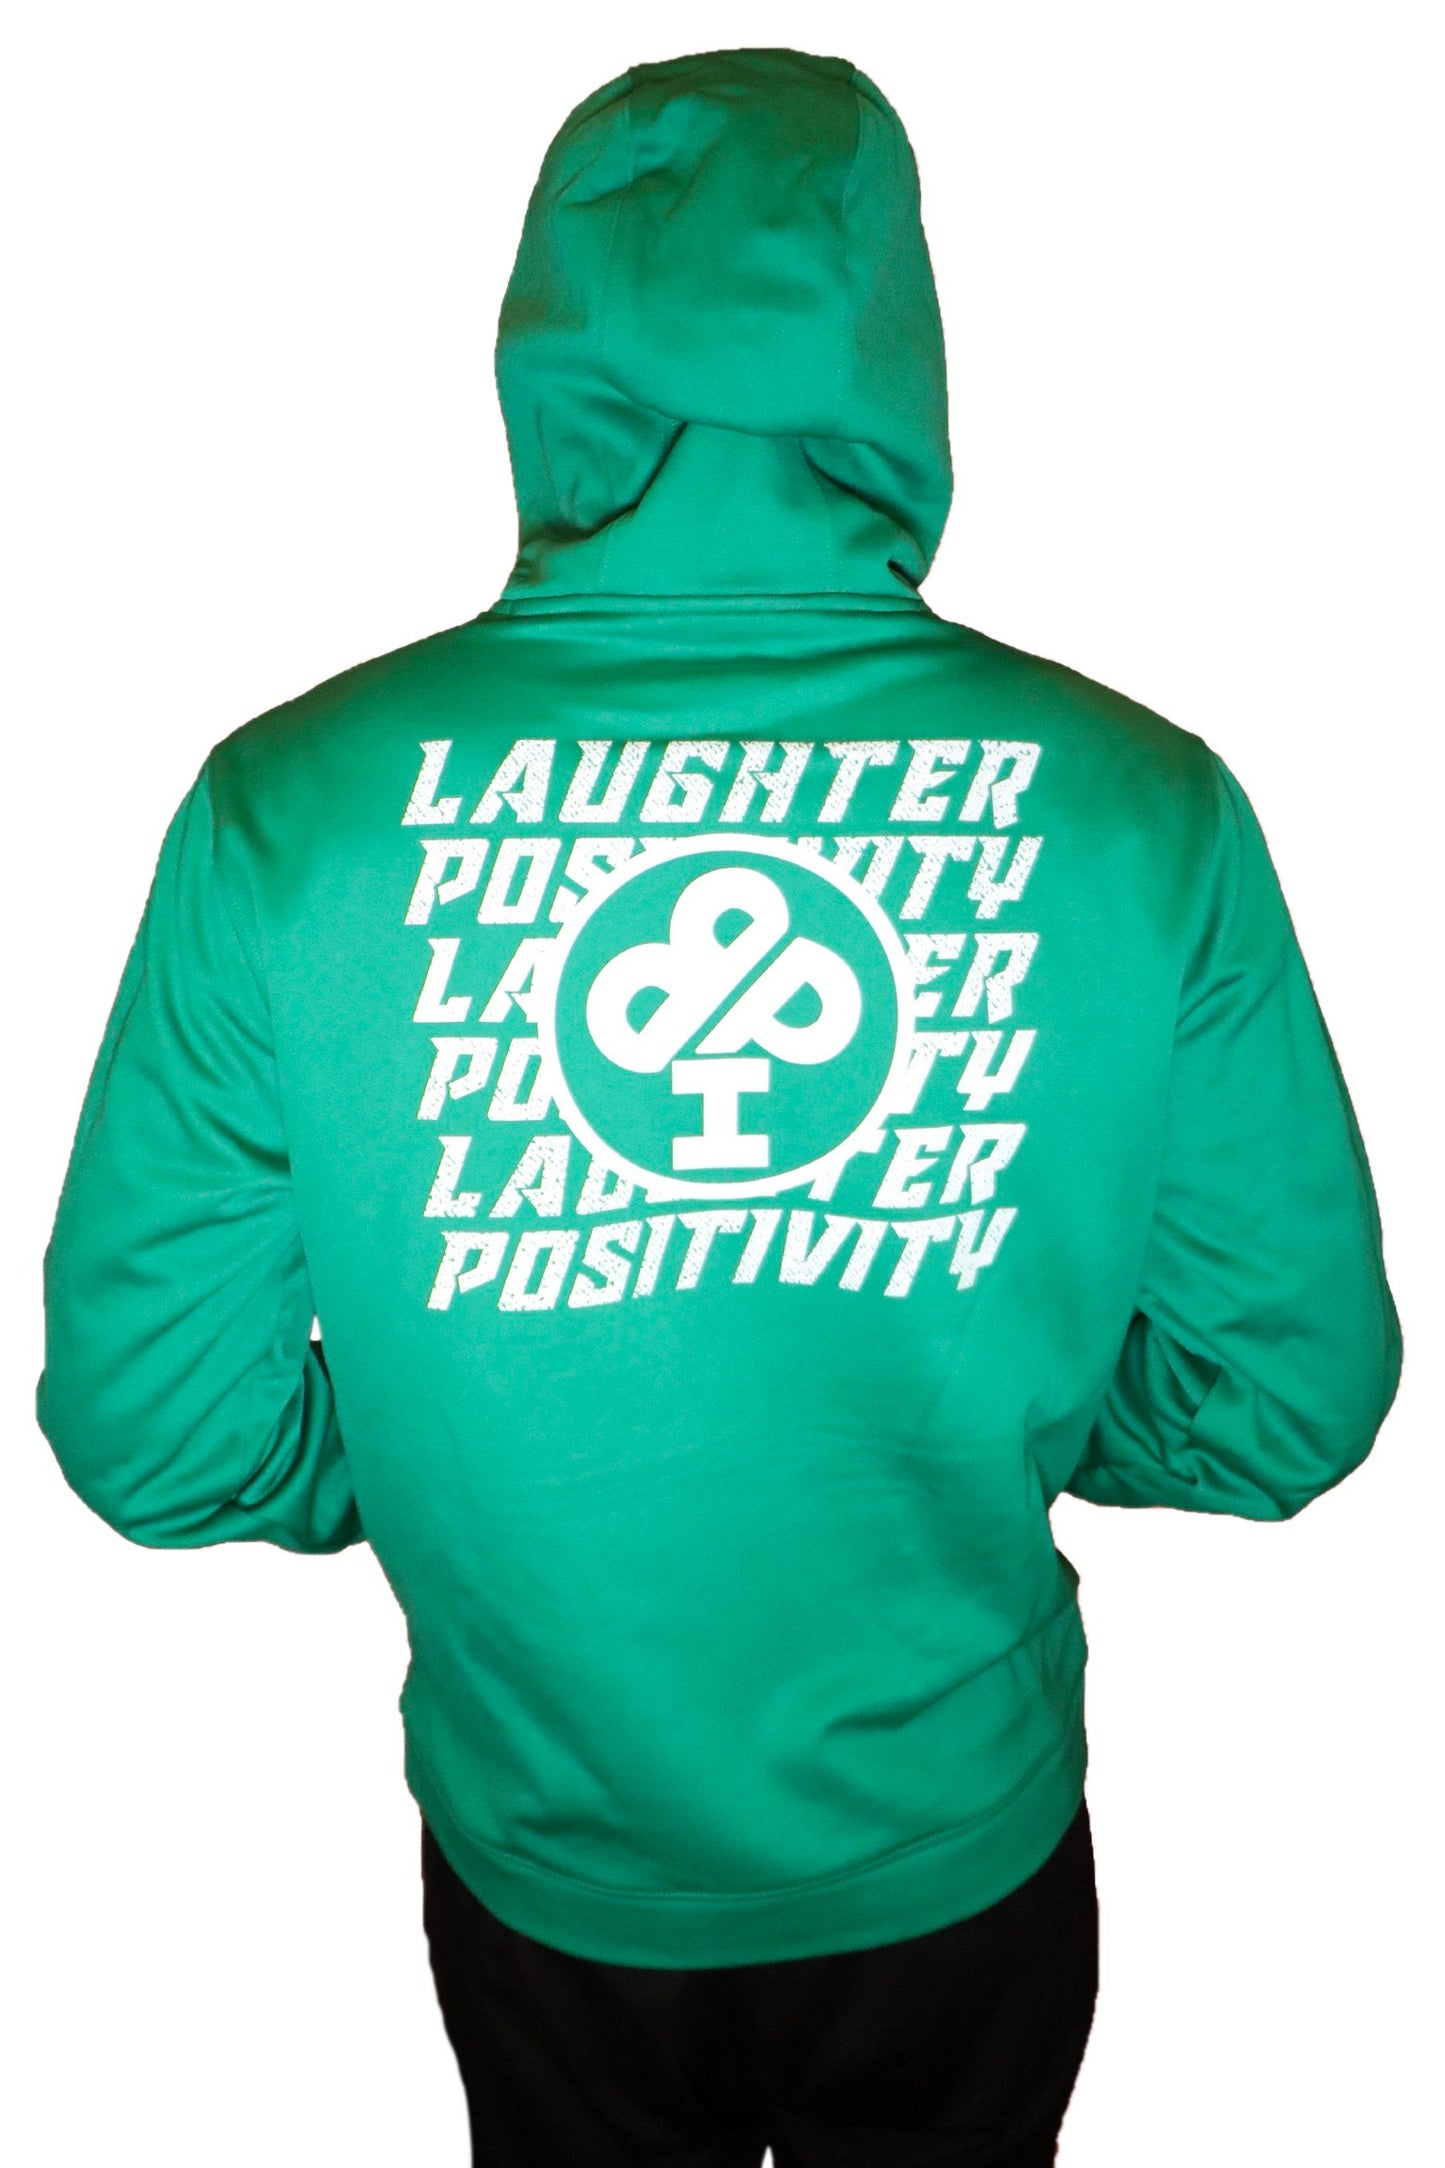 Laughter and Positivity Premium **DRY FIT** in Blue YOUTH ONLY White Adult Small